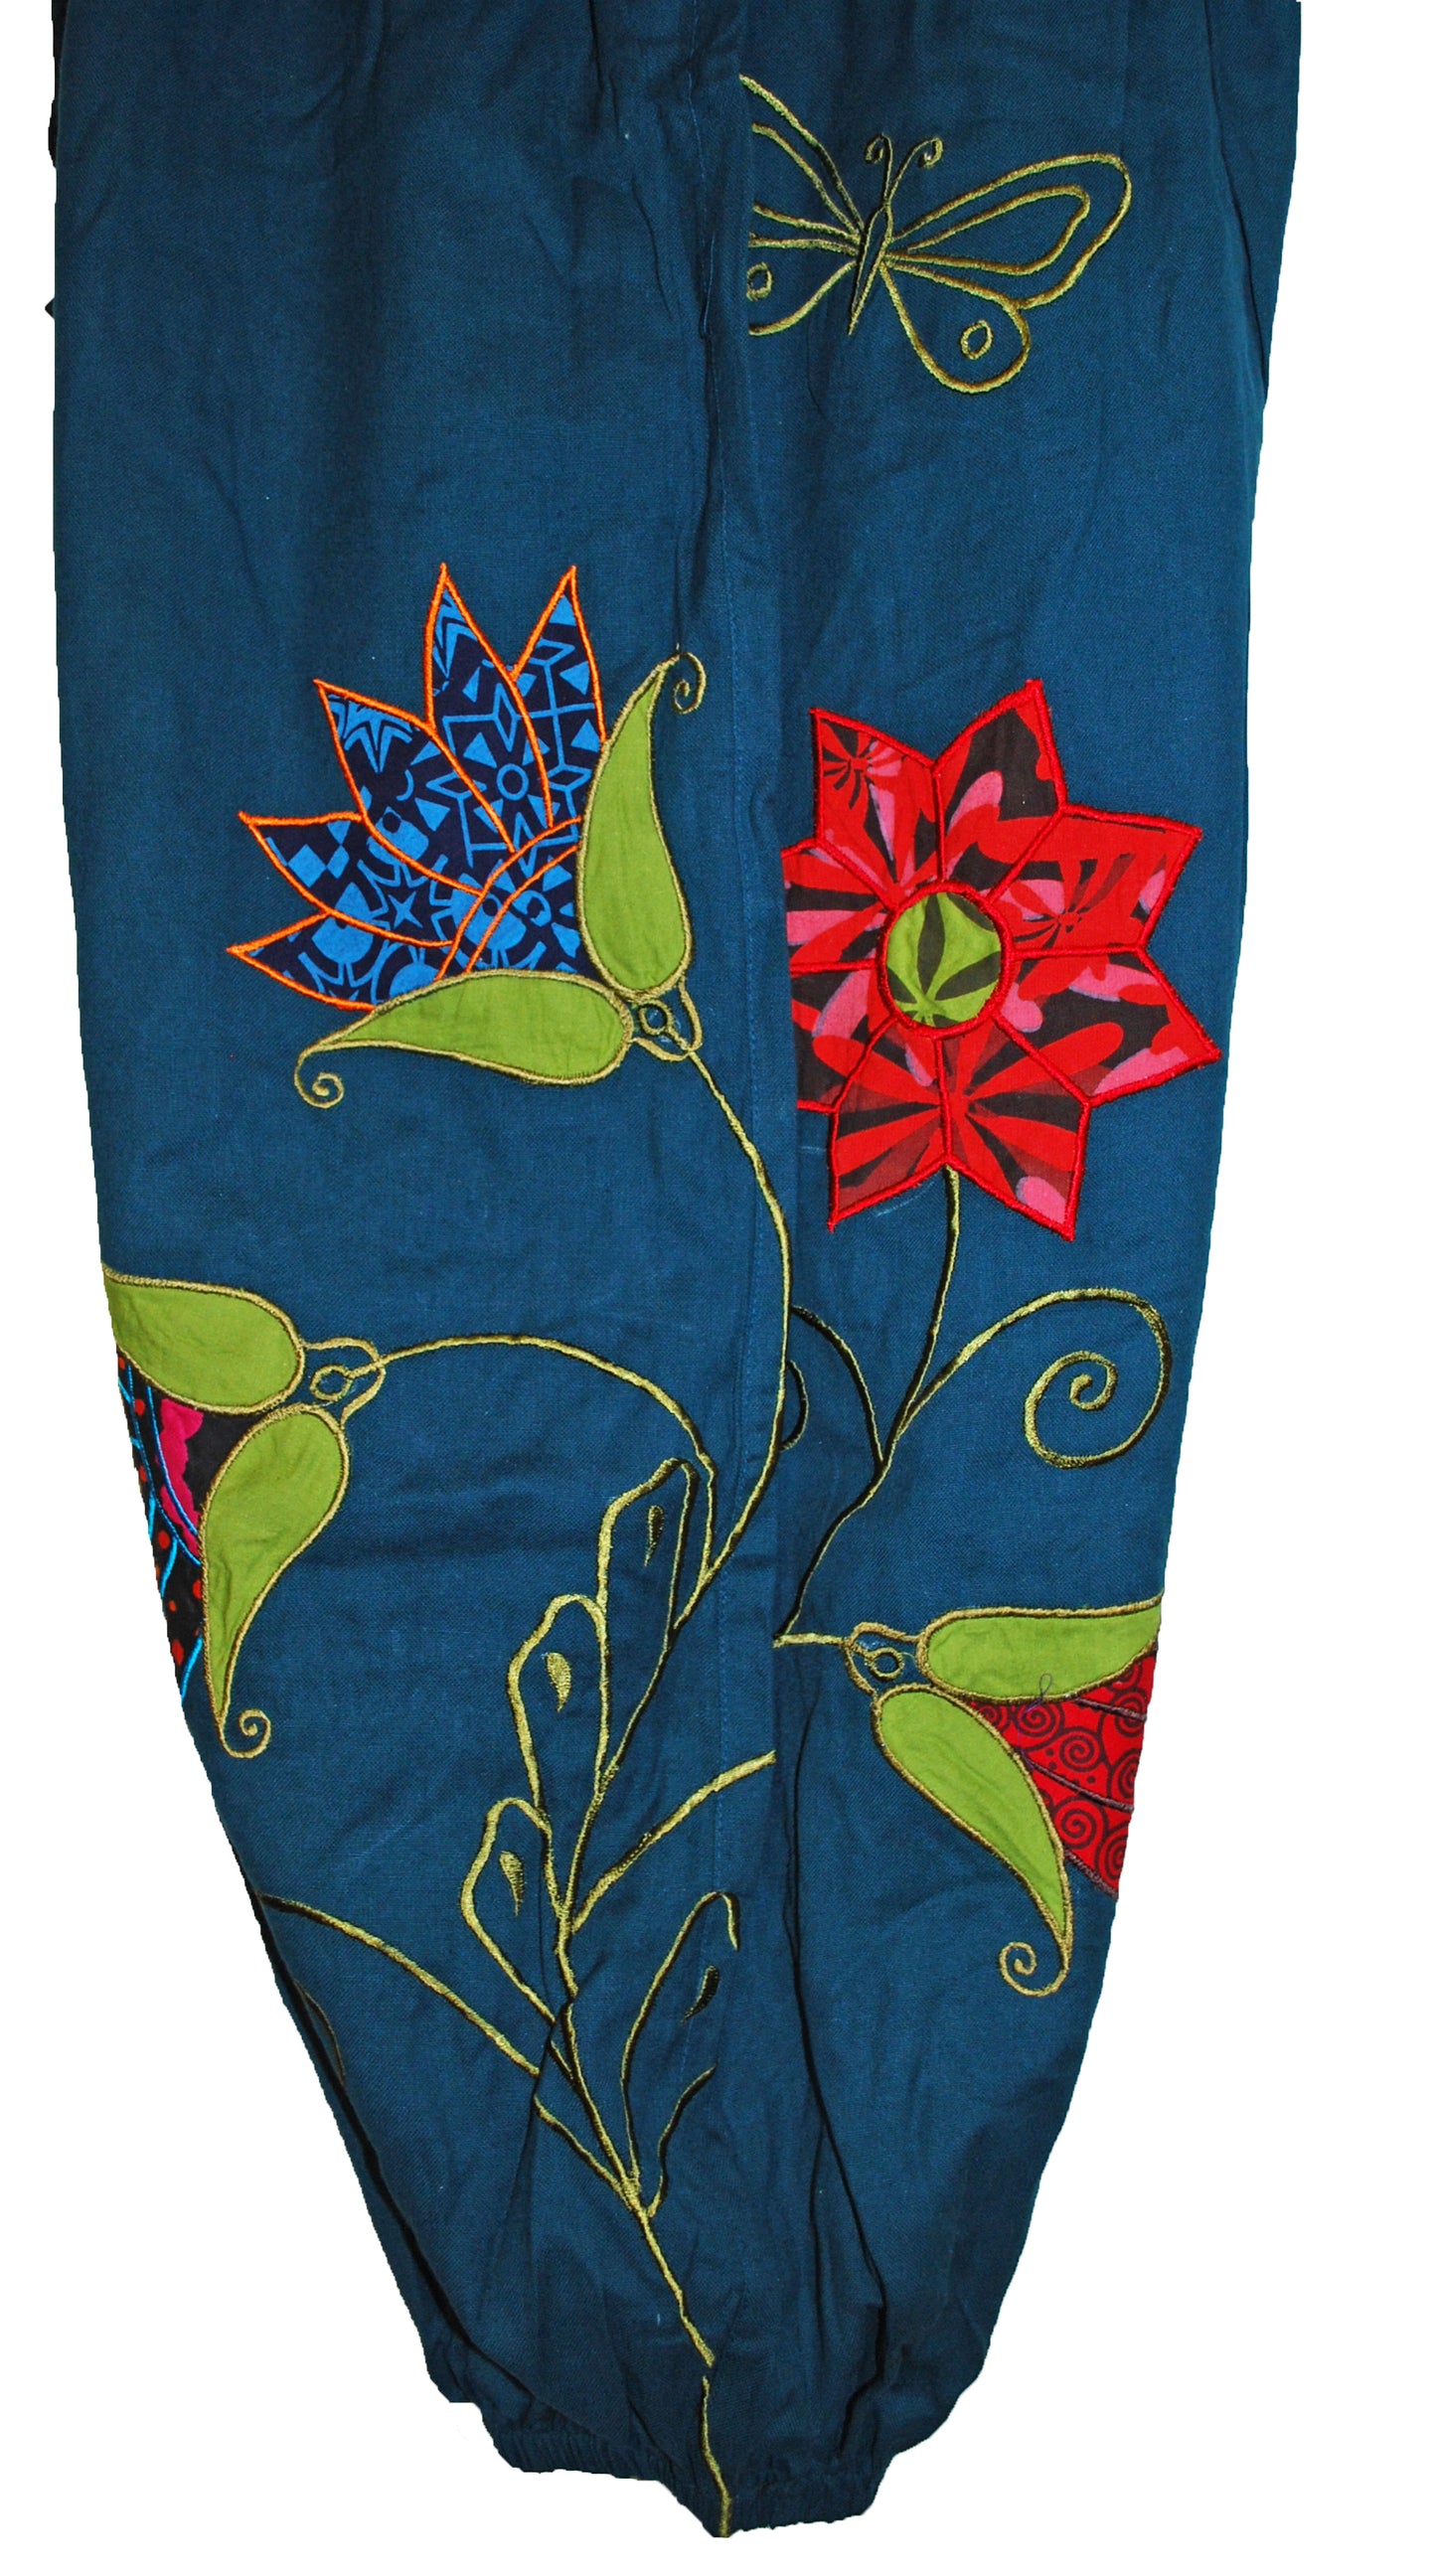 Hippy Butterfly Pattern Cotton Trousers